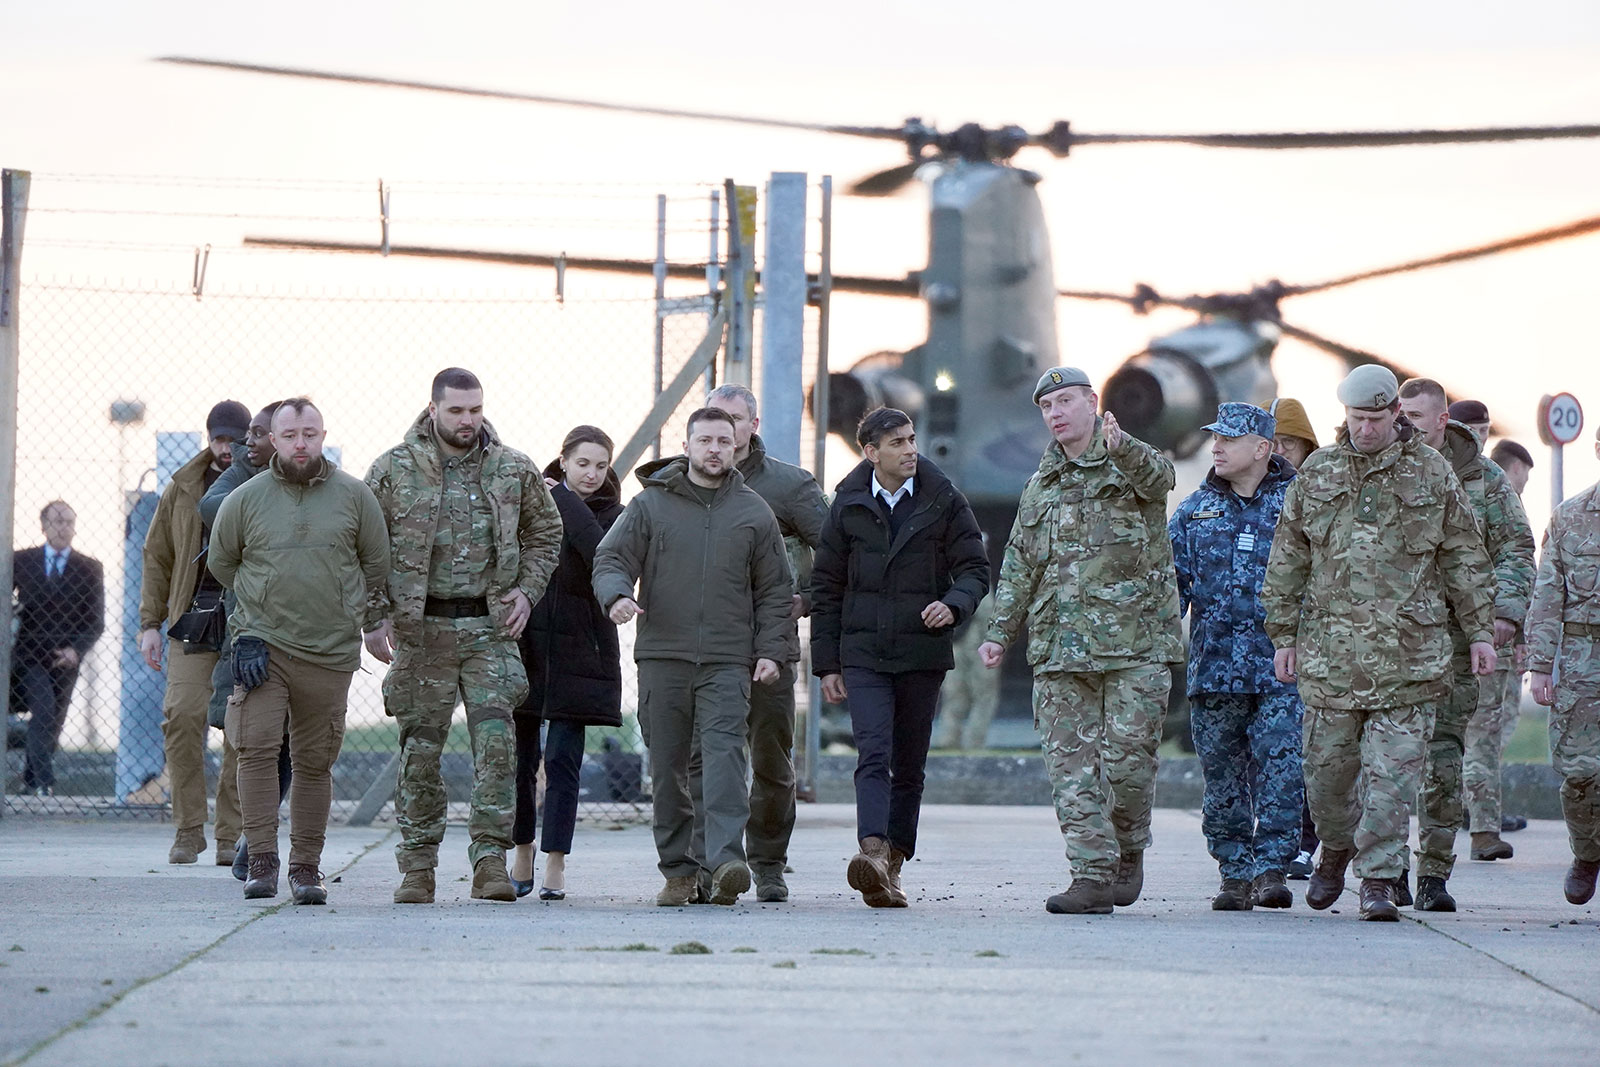 British Prime Minister Rishi Sunak and Ukrainian President Volodymyr Zelensky arrive to meet Ukrainian troops being trained to command Challenger 2 tanks at a military facility on February 8 at Lulworth Camp in Dorset, England.